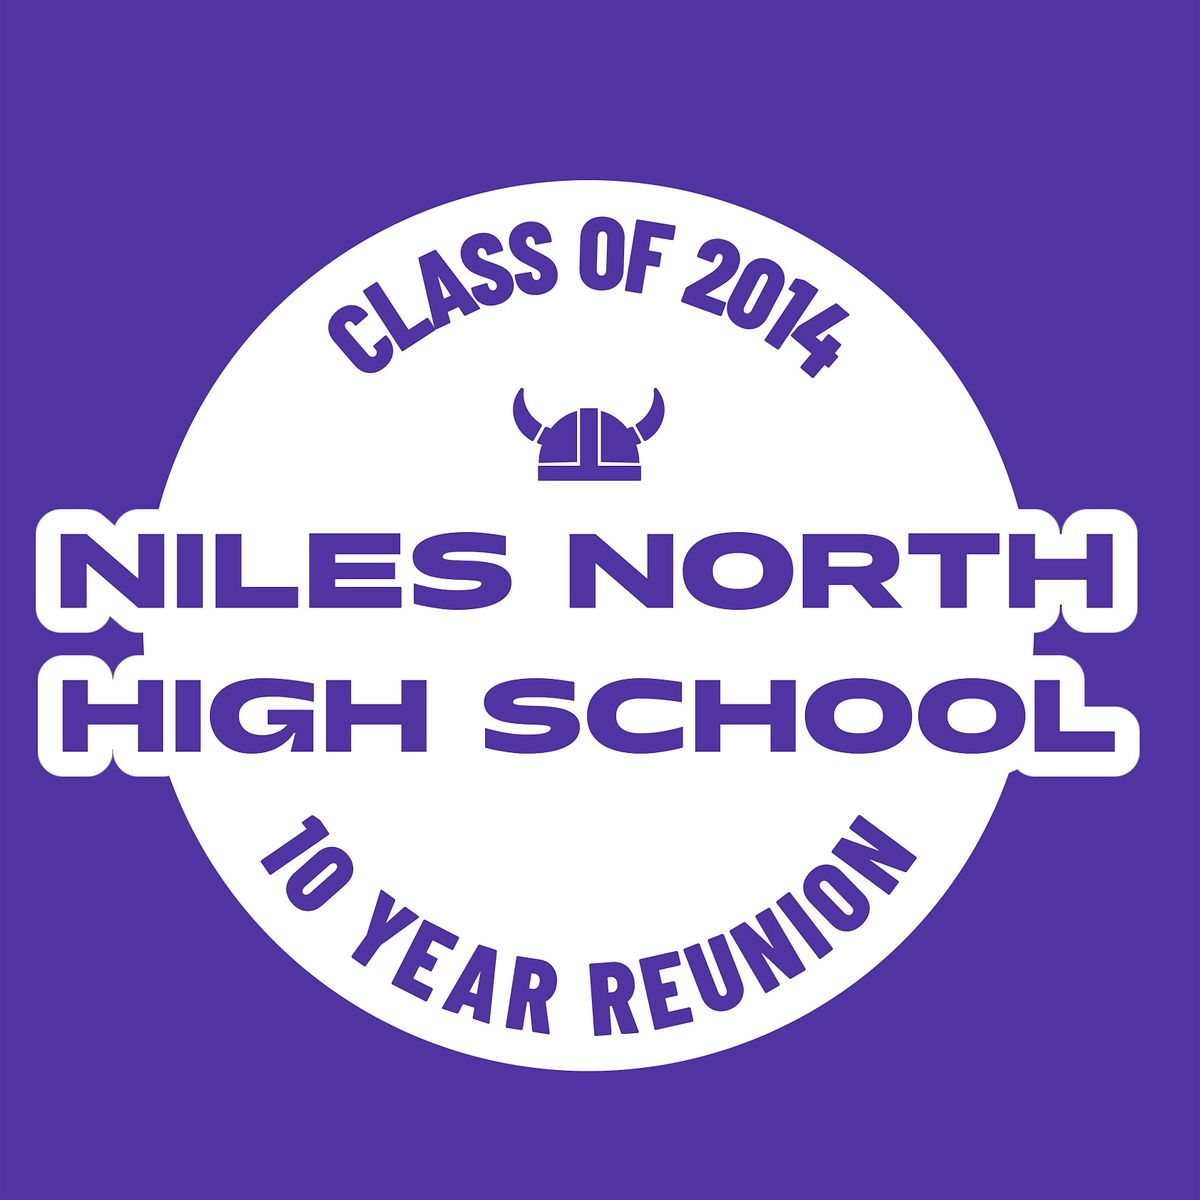 Niles North Class of 2014 10 year reunion